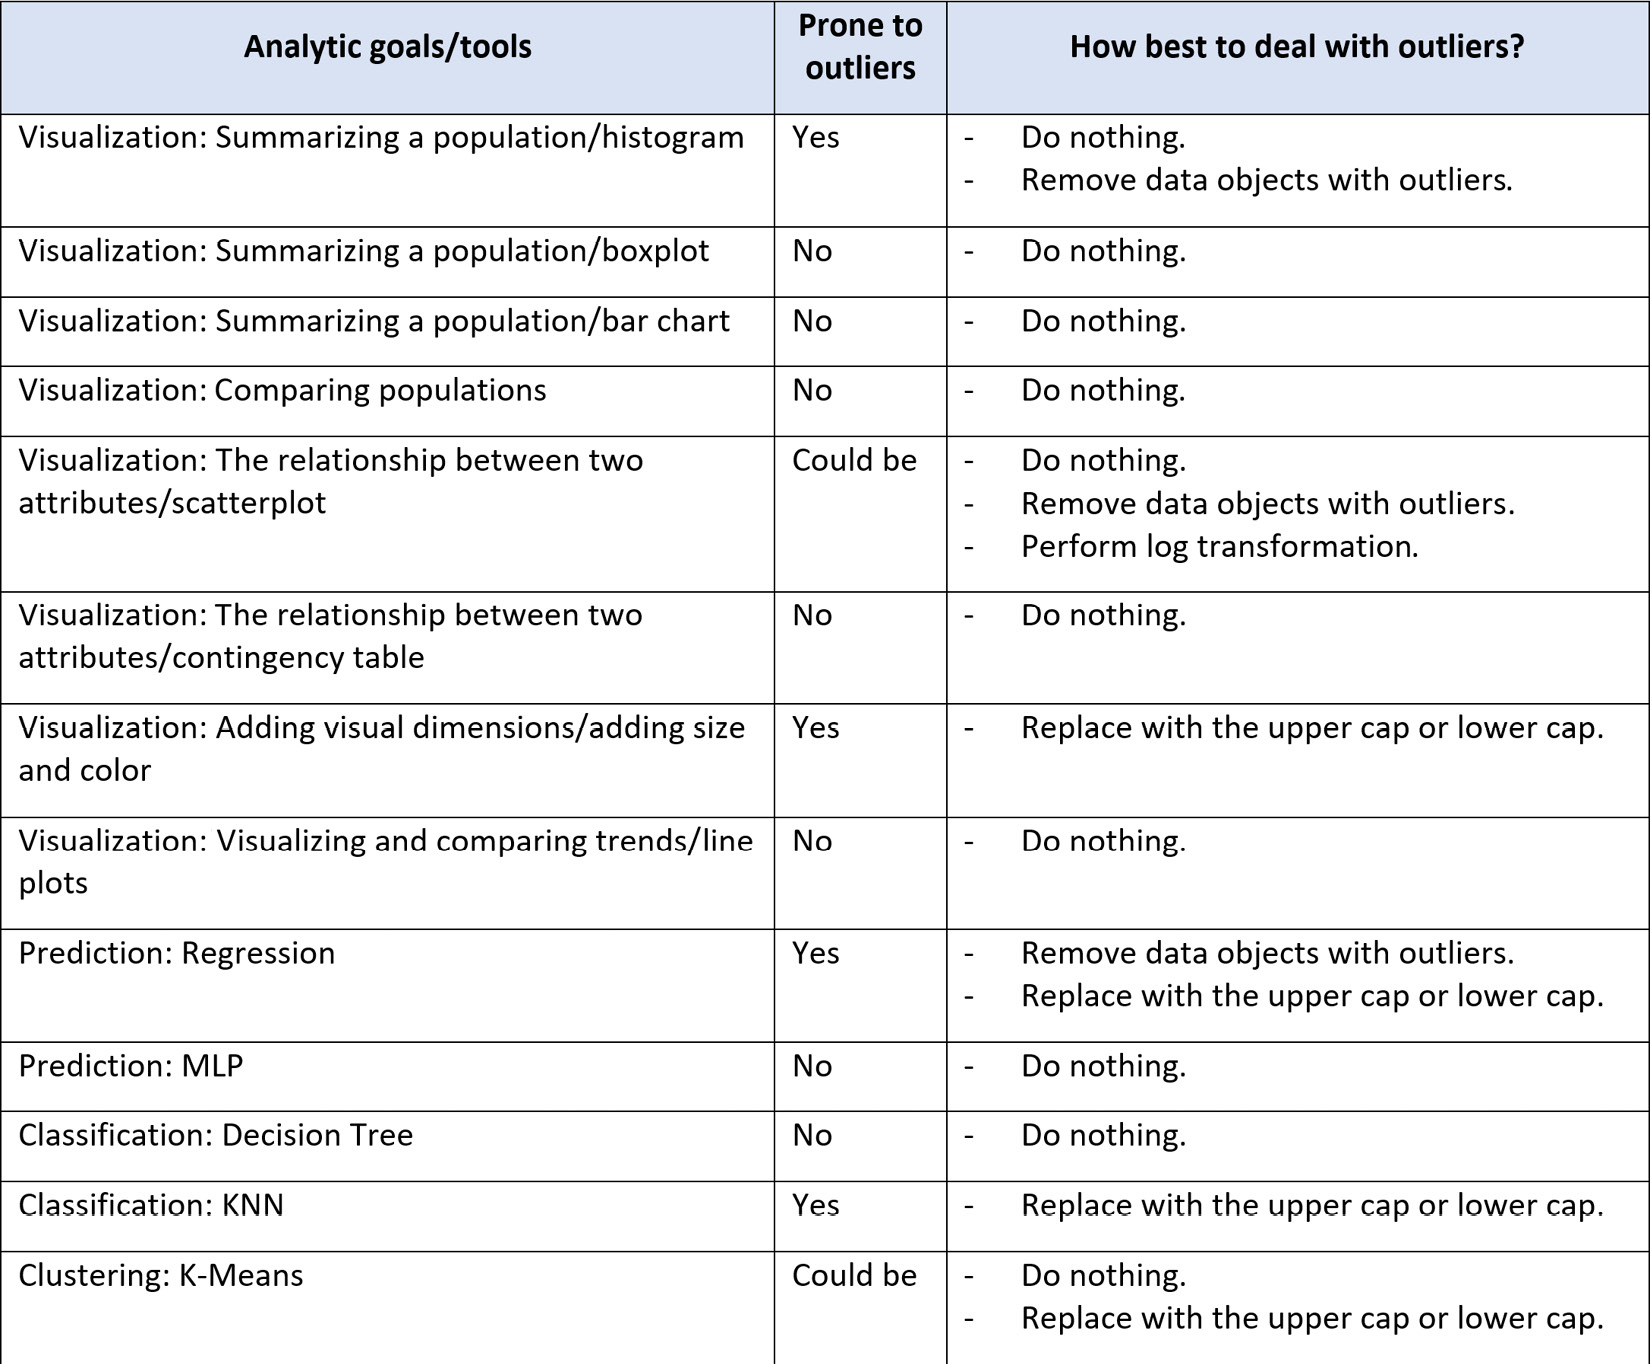 Figure 11.25 – Summary table of analytic goals and tools and the best way to deal with outliers if they exist
